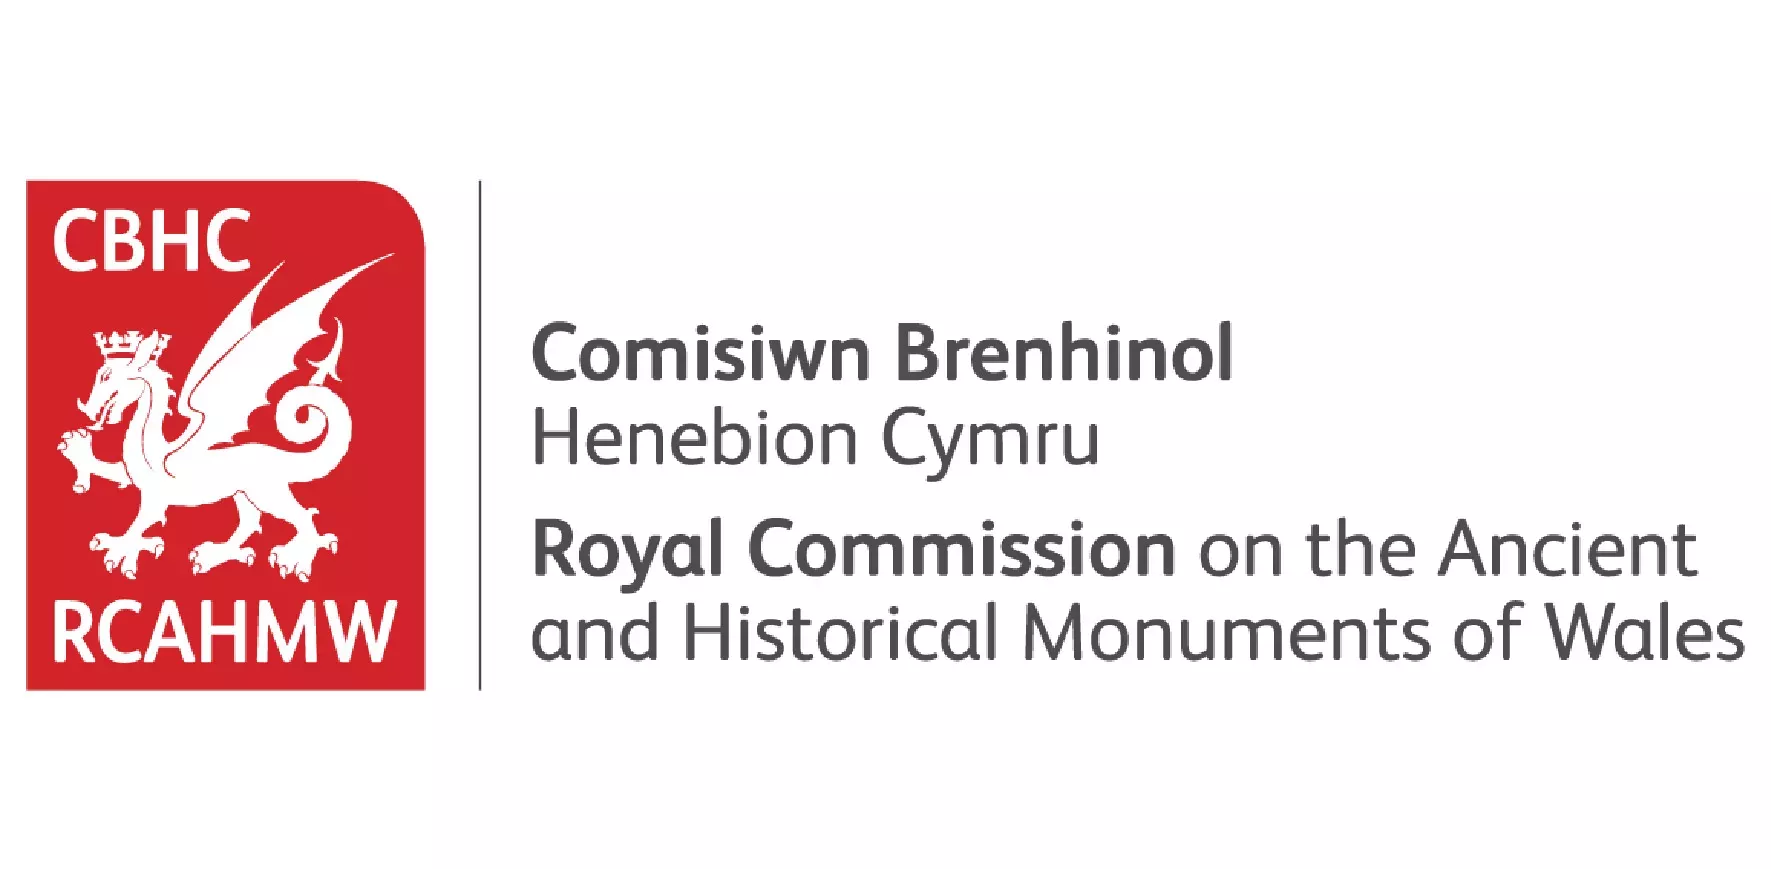 Royal Commission on the Ancient and Historical Monuments of Wales website